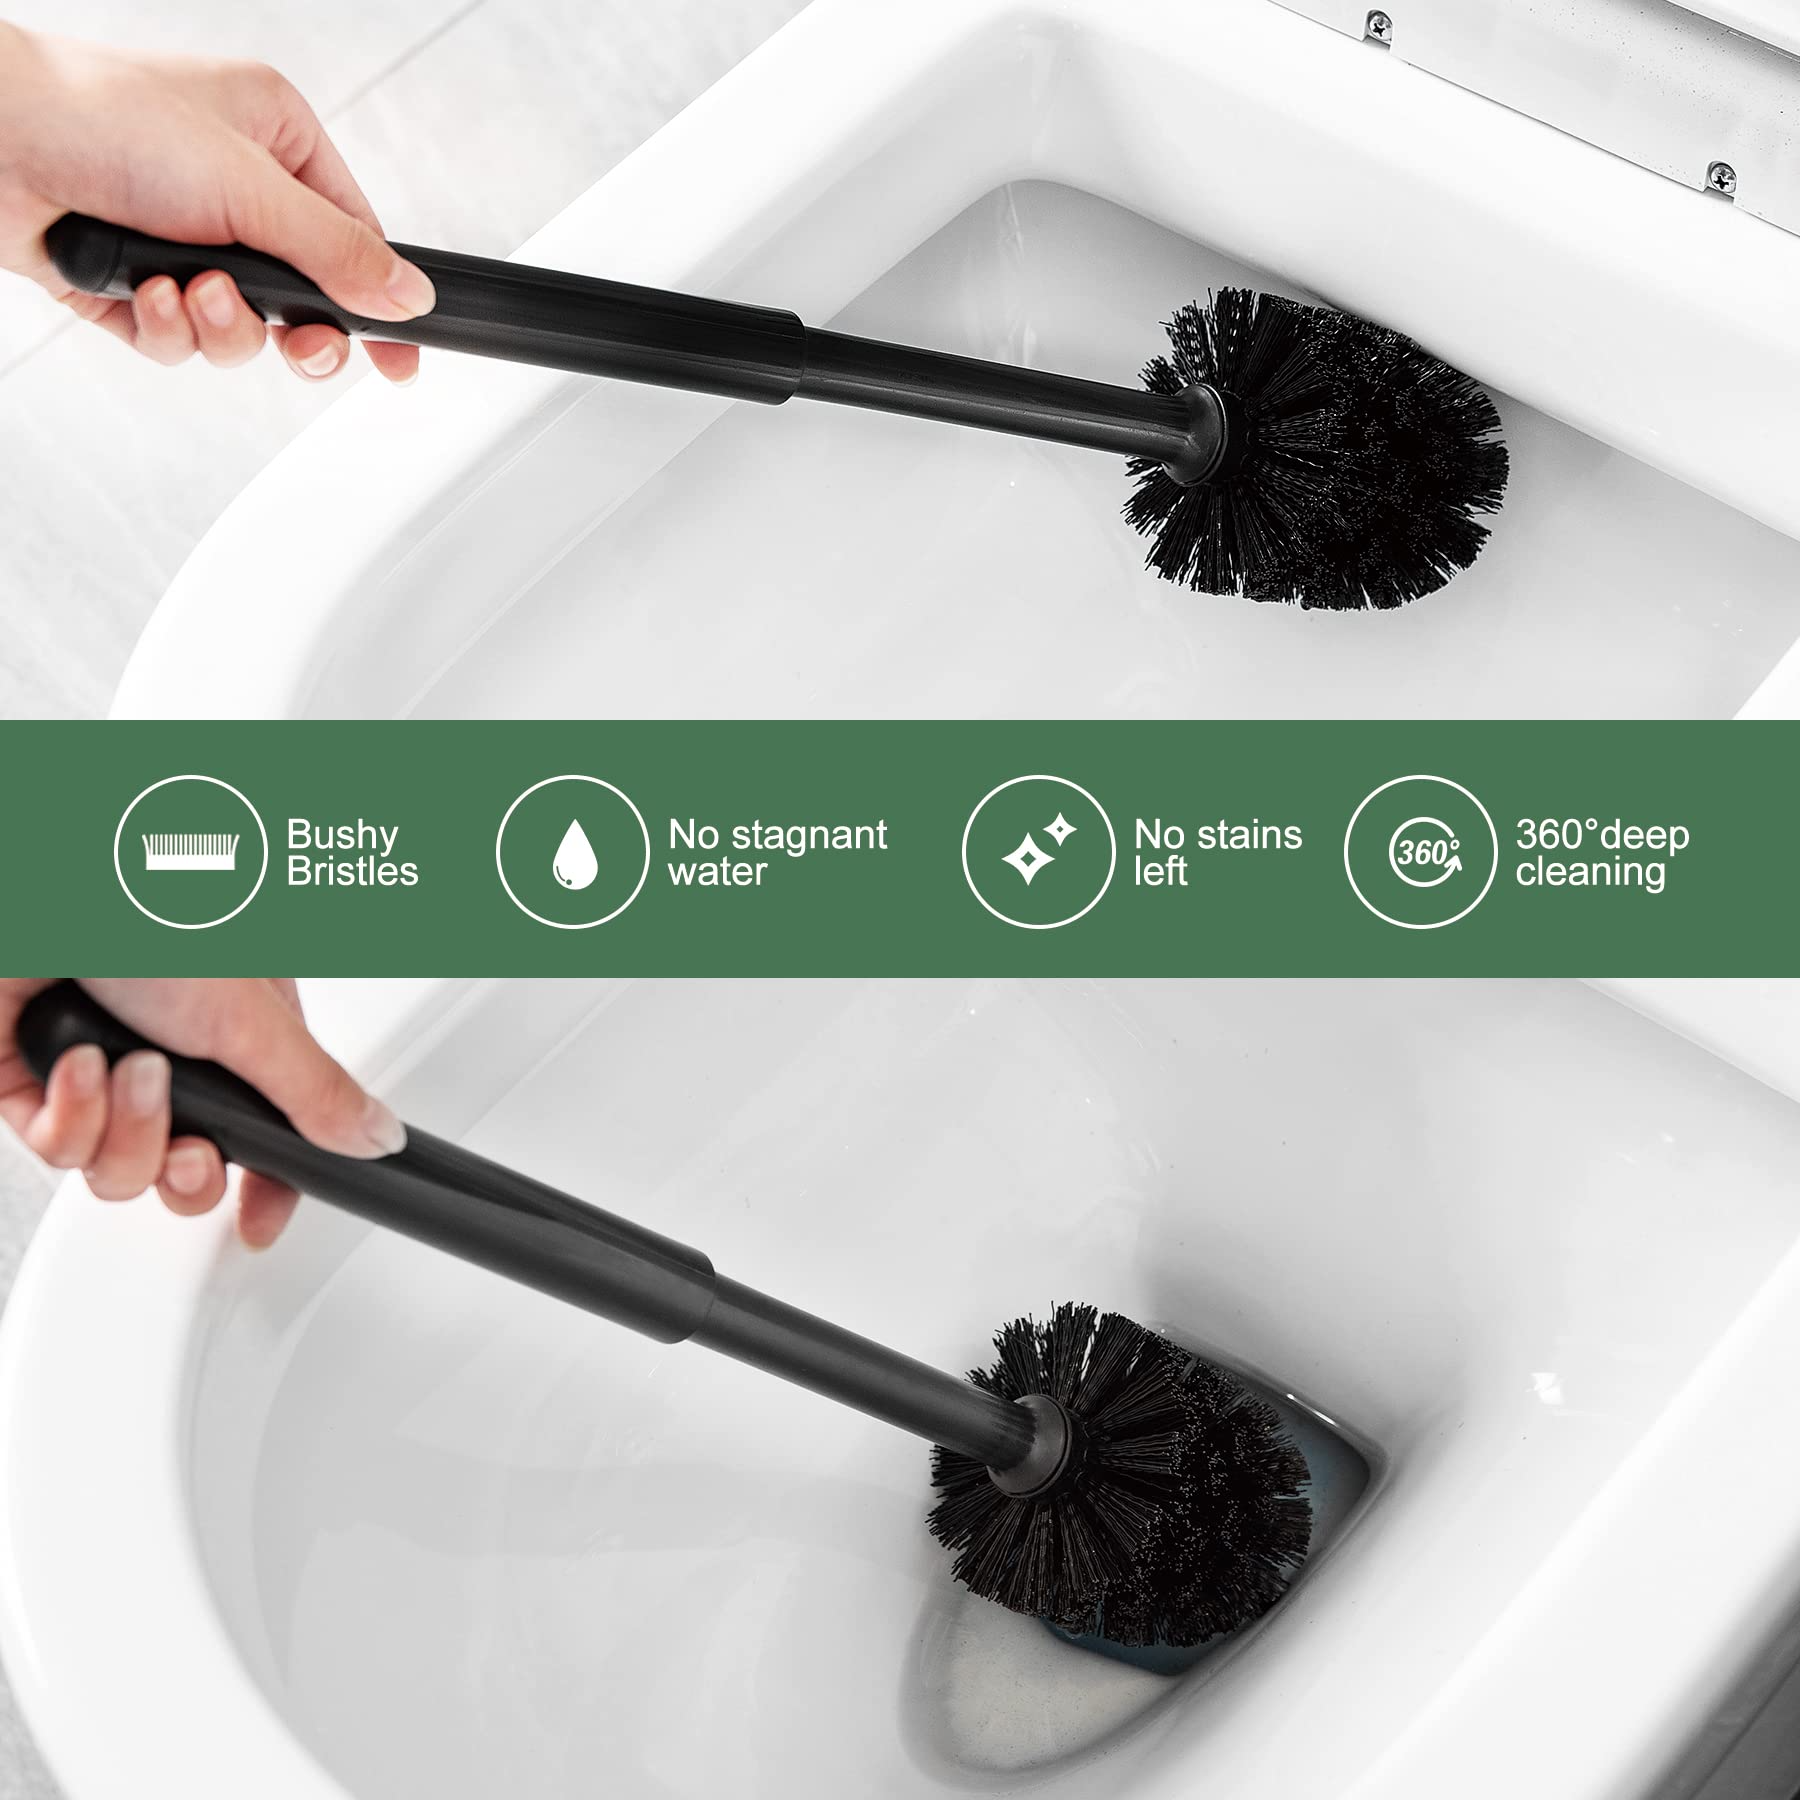 How to Clean a Toilet Brush and Holder